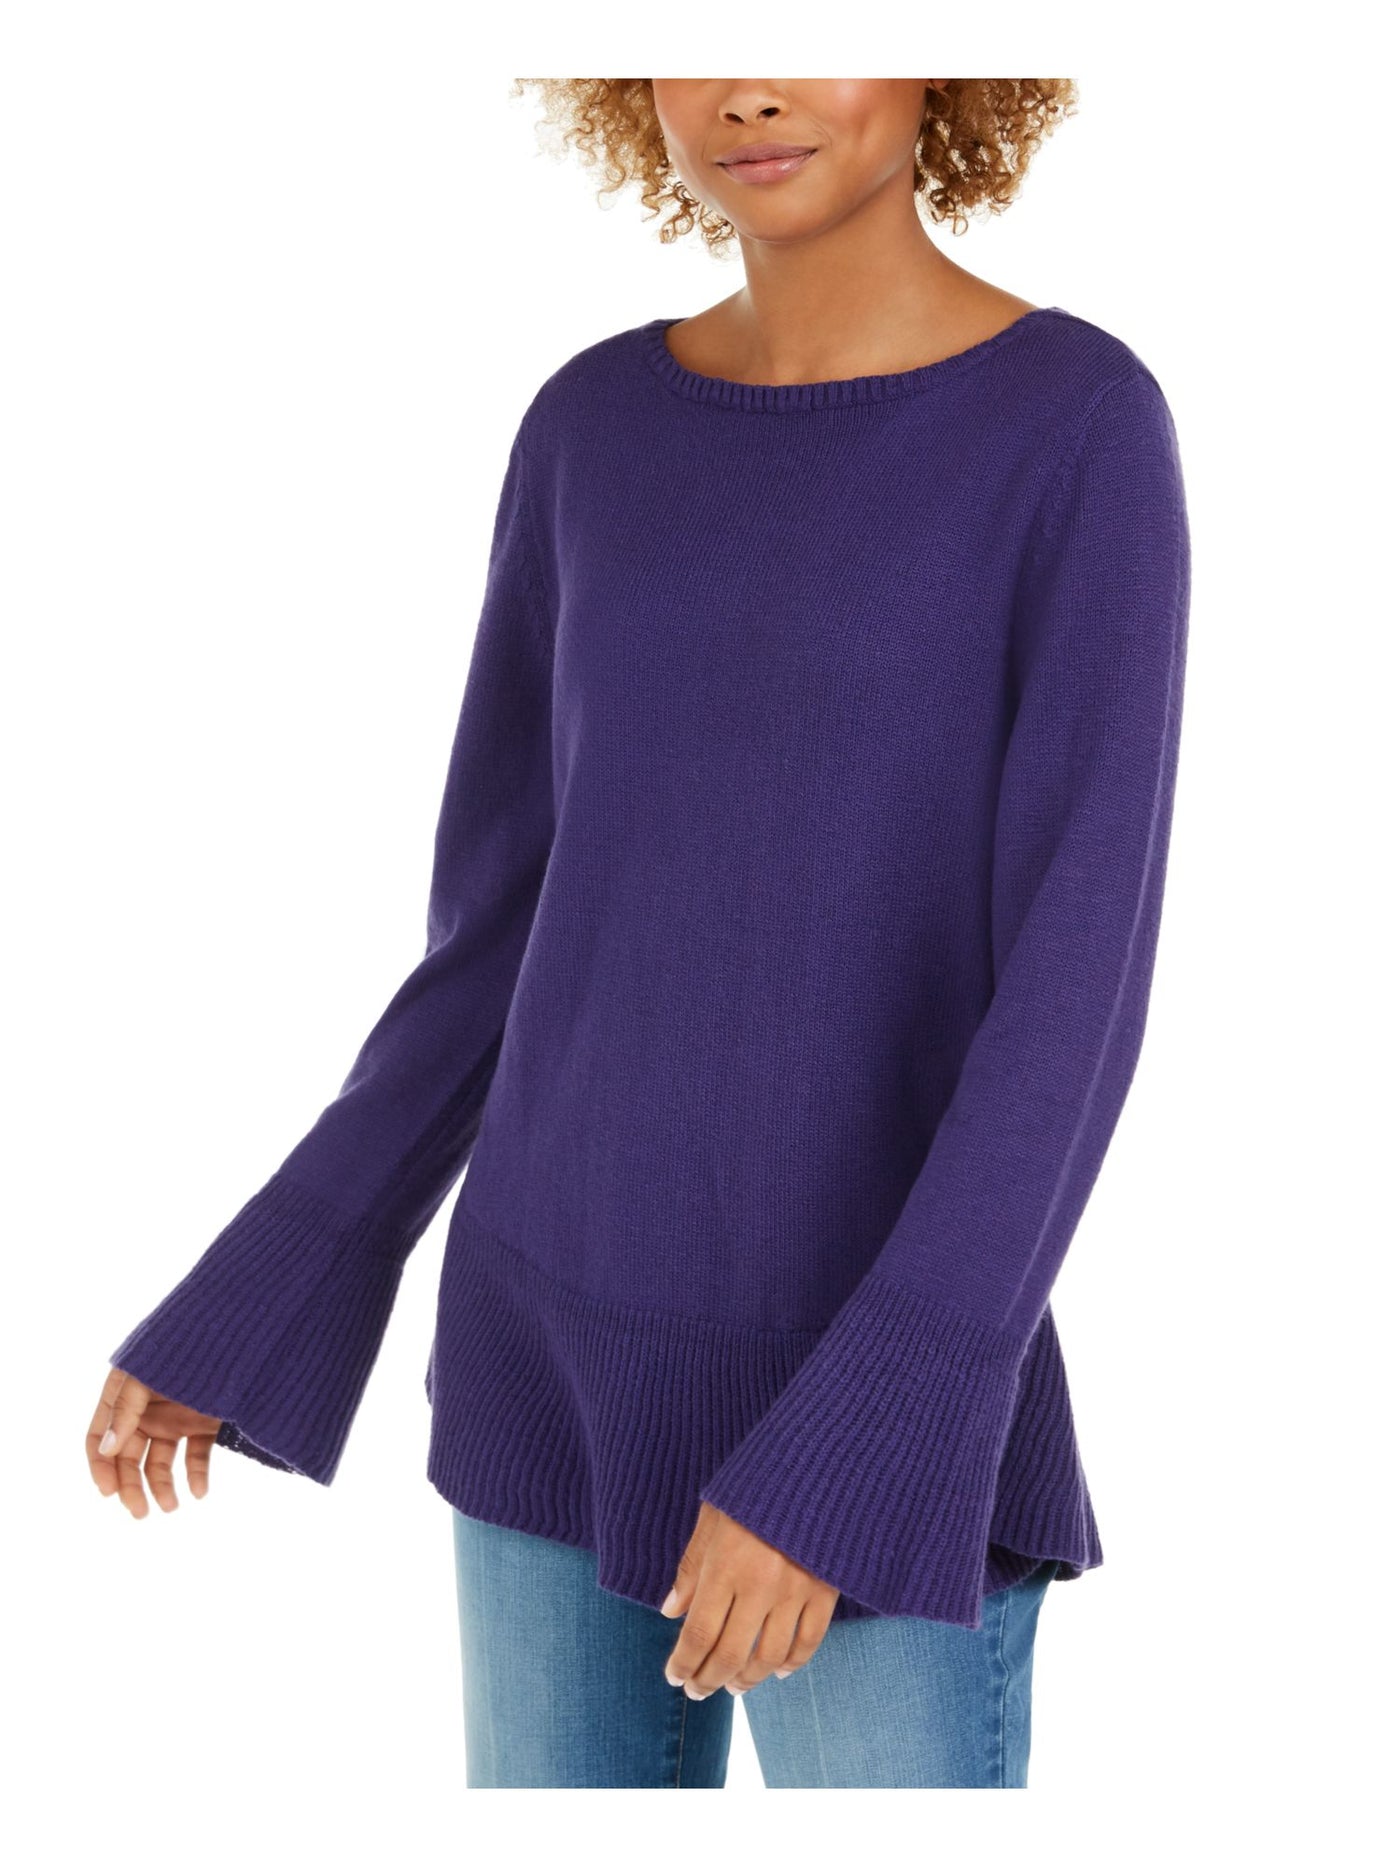 STYLE & COMPANY Womens Purple Ribbed Patterned Long Sleeve Jewel Neck Blouse Petites PP